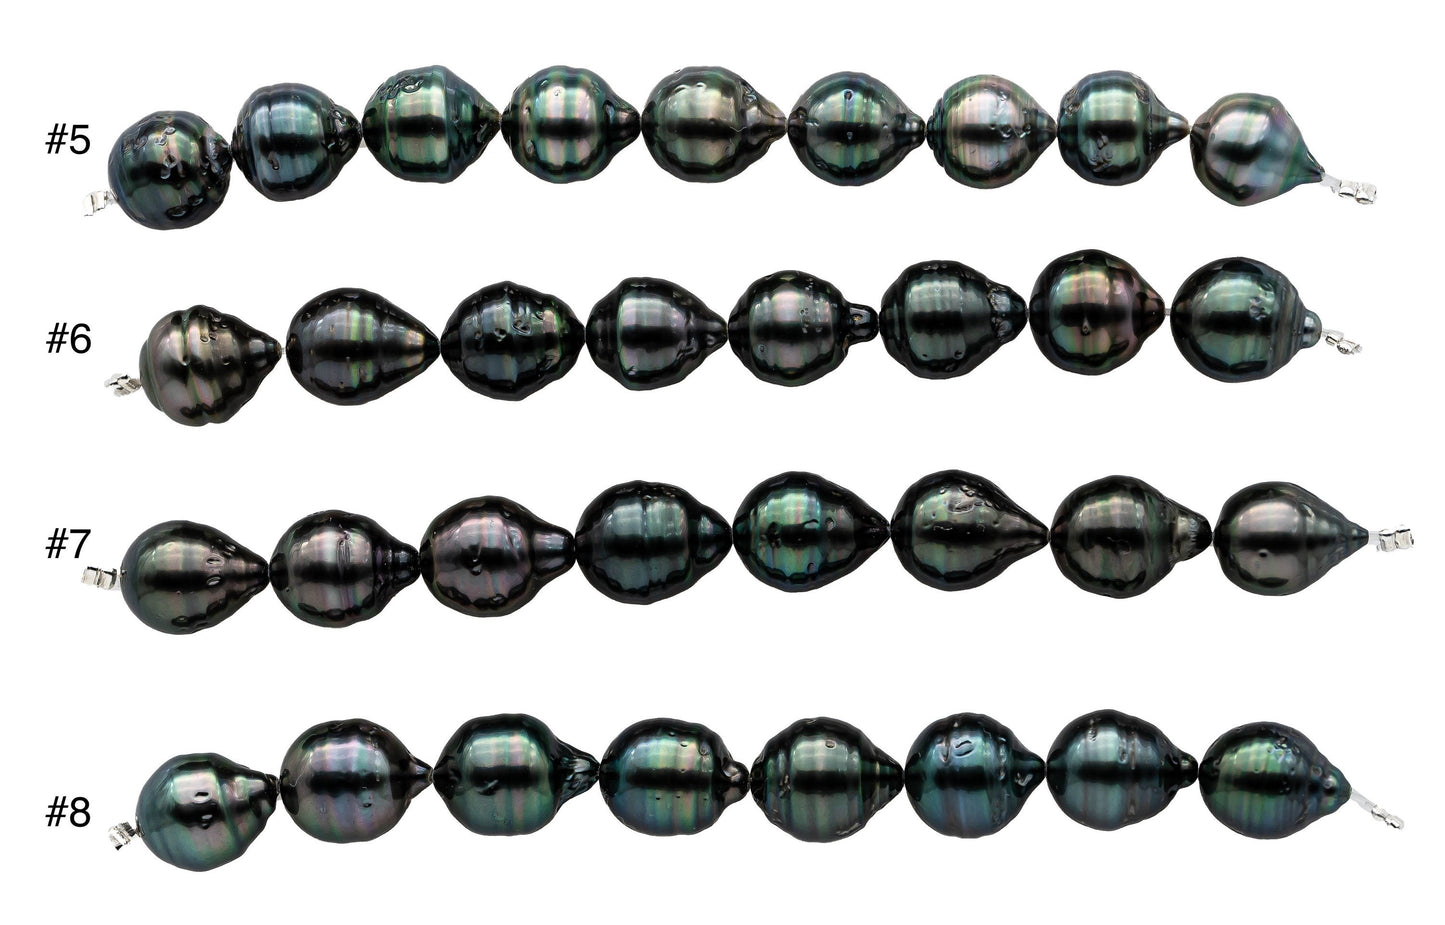 Peacock Black Tahitian Pearl Drops with Nice Luster and Blemishes, Natural Color Pearl Bead Strands in 4 Inches Long, 10-11mm SKU#1104TH